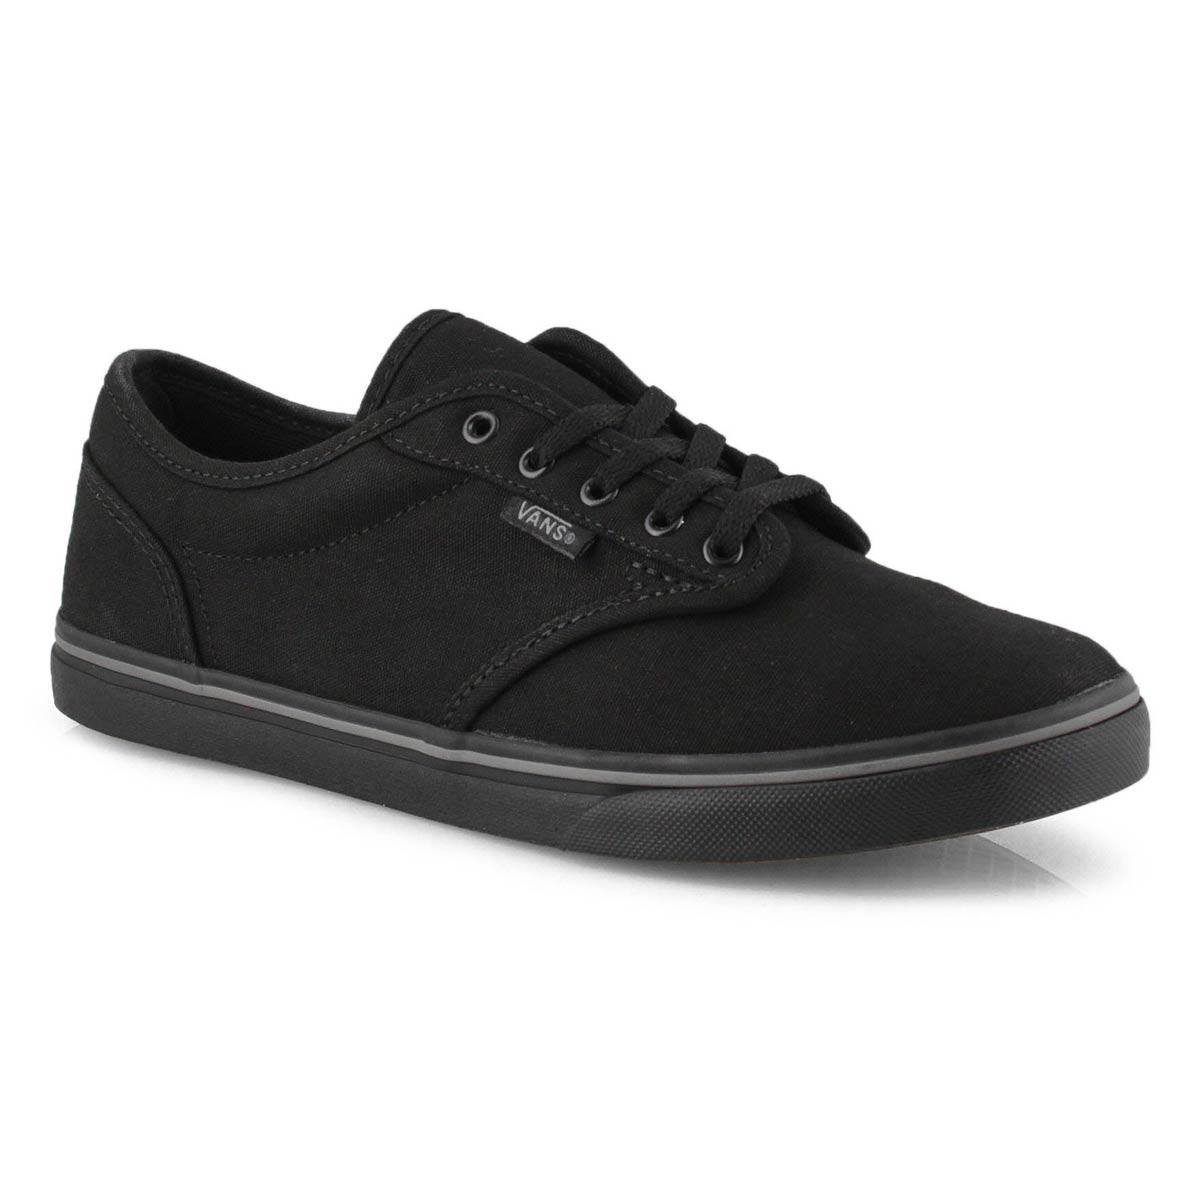 vans atwood low womens